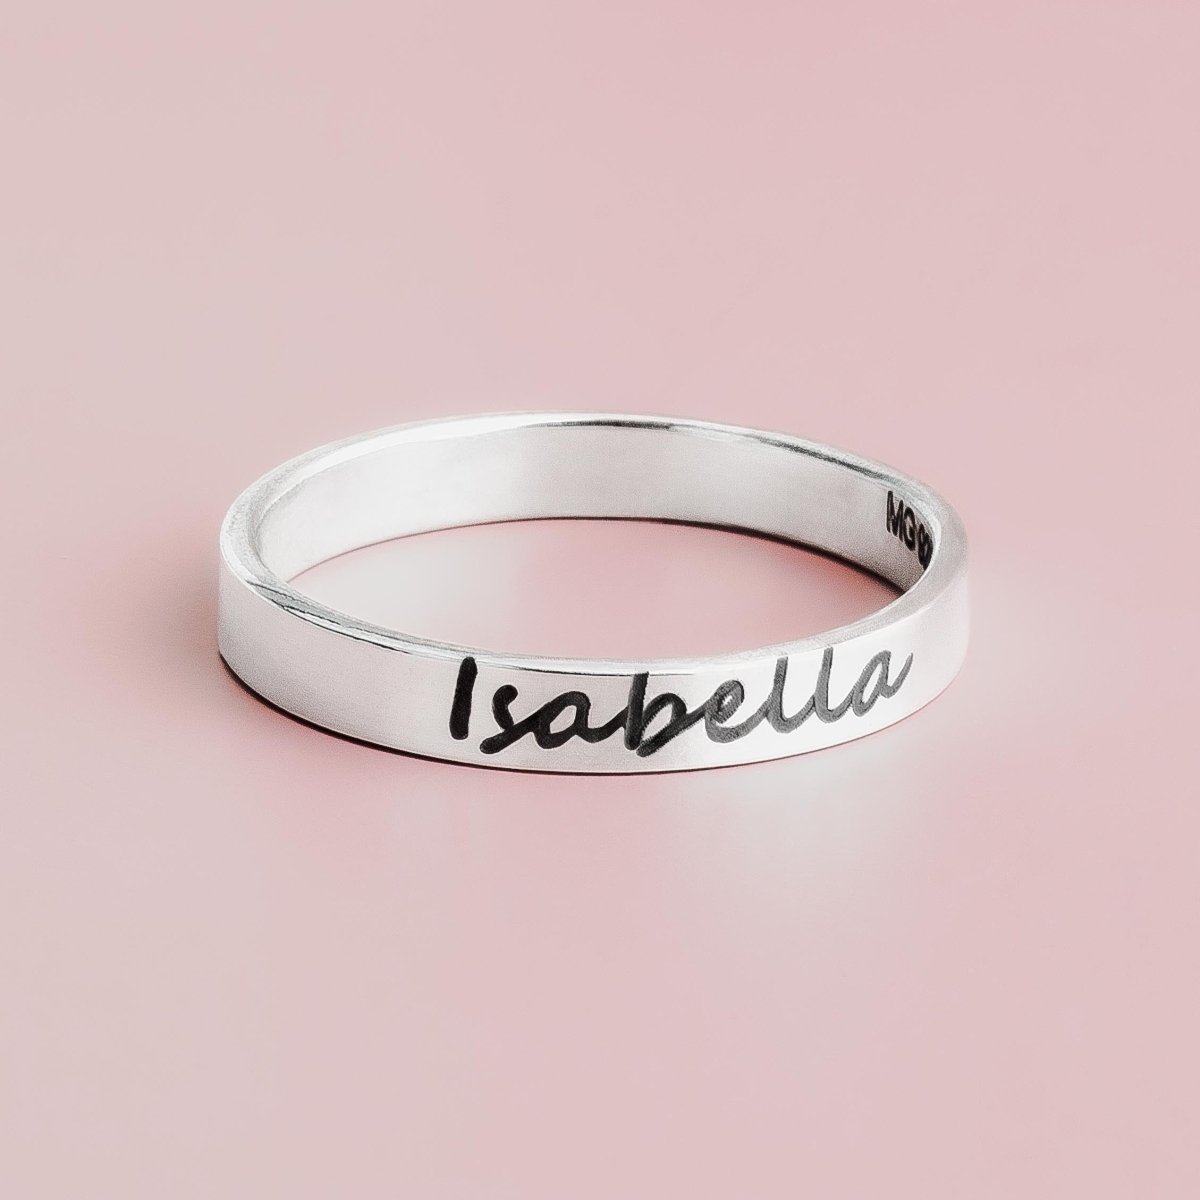 Personalized Name Ring Band - Melanie Golden Jewelry - engraved, personalized, personalized jewelry, ring bands, rings, stacking rings